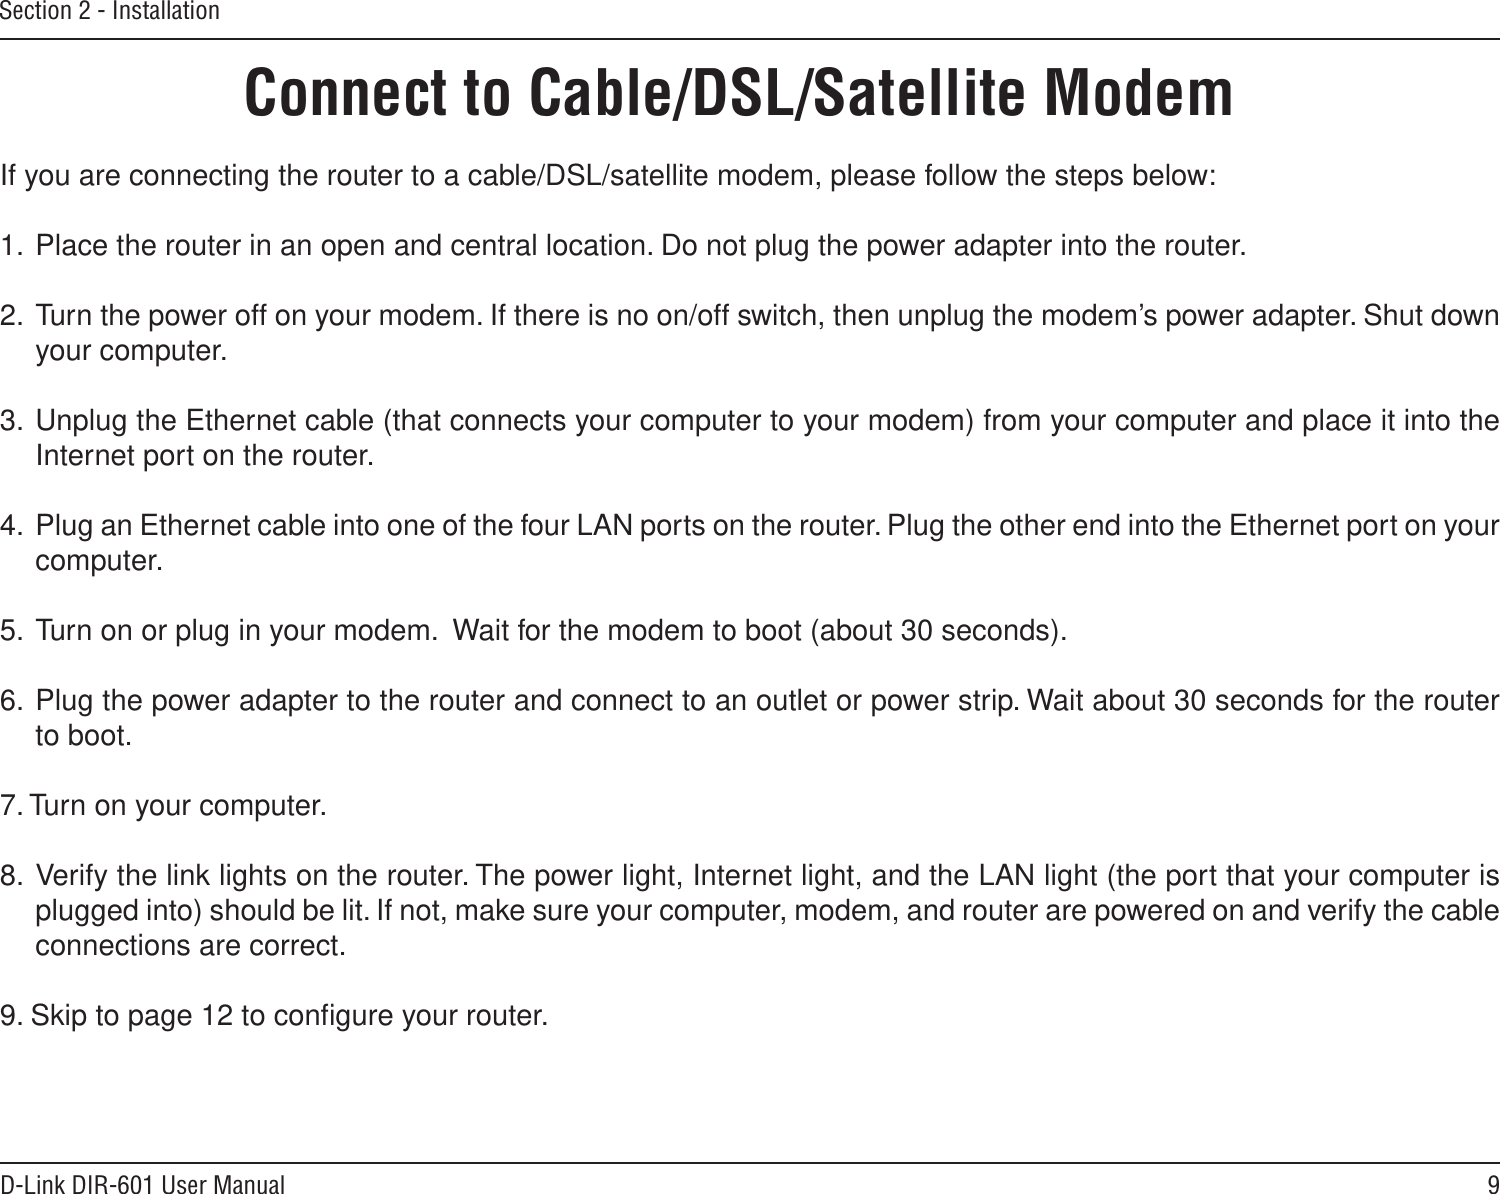 9D-Link DIR-601 User ManualSection 2 - InstallationIf you are connecting the router to a cable/DSL/satellite modem, please follow the steps below:1.  Place the router in an open and central location. Do not plug the power adapter into the router. 2.  Turn the power off on your modem. If there is no on/off switch, then unplug the modem’s power adapter. Shut down your computer.3.  Unplug the Ethernet cable (that connects your computer to your modem) from your computer and place it into the Internet port on the router.  4.  Plug an Ethernet cable into one of the four LAN ports on the router. Plug the other end into the Ethernet port on your computer.5.  Turn on or plug in your modem.  Wait for the modem to boot (about 30 seconds). 6.  Plug the power adapter to the router and connect to an outlet or power strip. Wait about 30 seconds for the router to boot. 7. Turn on your computer. 8.  Verify the link lights on the router. The power light, Internet light, and the LAN light (the port that your computer is plugged into) should be lit. If not, make sure your computer, modem, and router are powered on and verify the cable connections are correct. 9. Skip to page 12 to conﬁgure your router. Connect to Cable/DSL/Satellite Modem